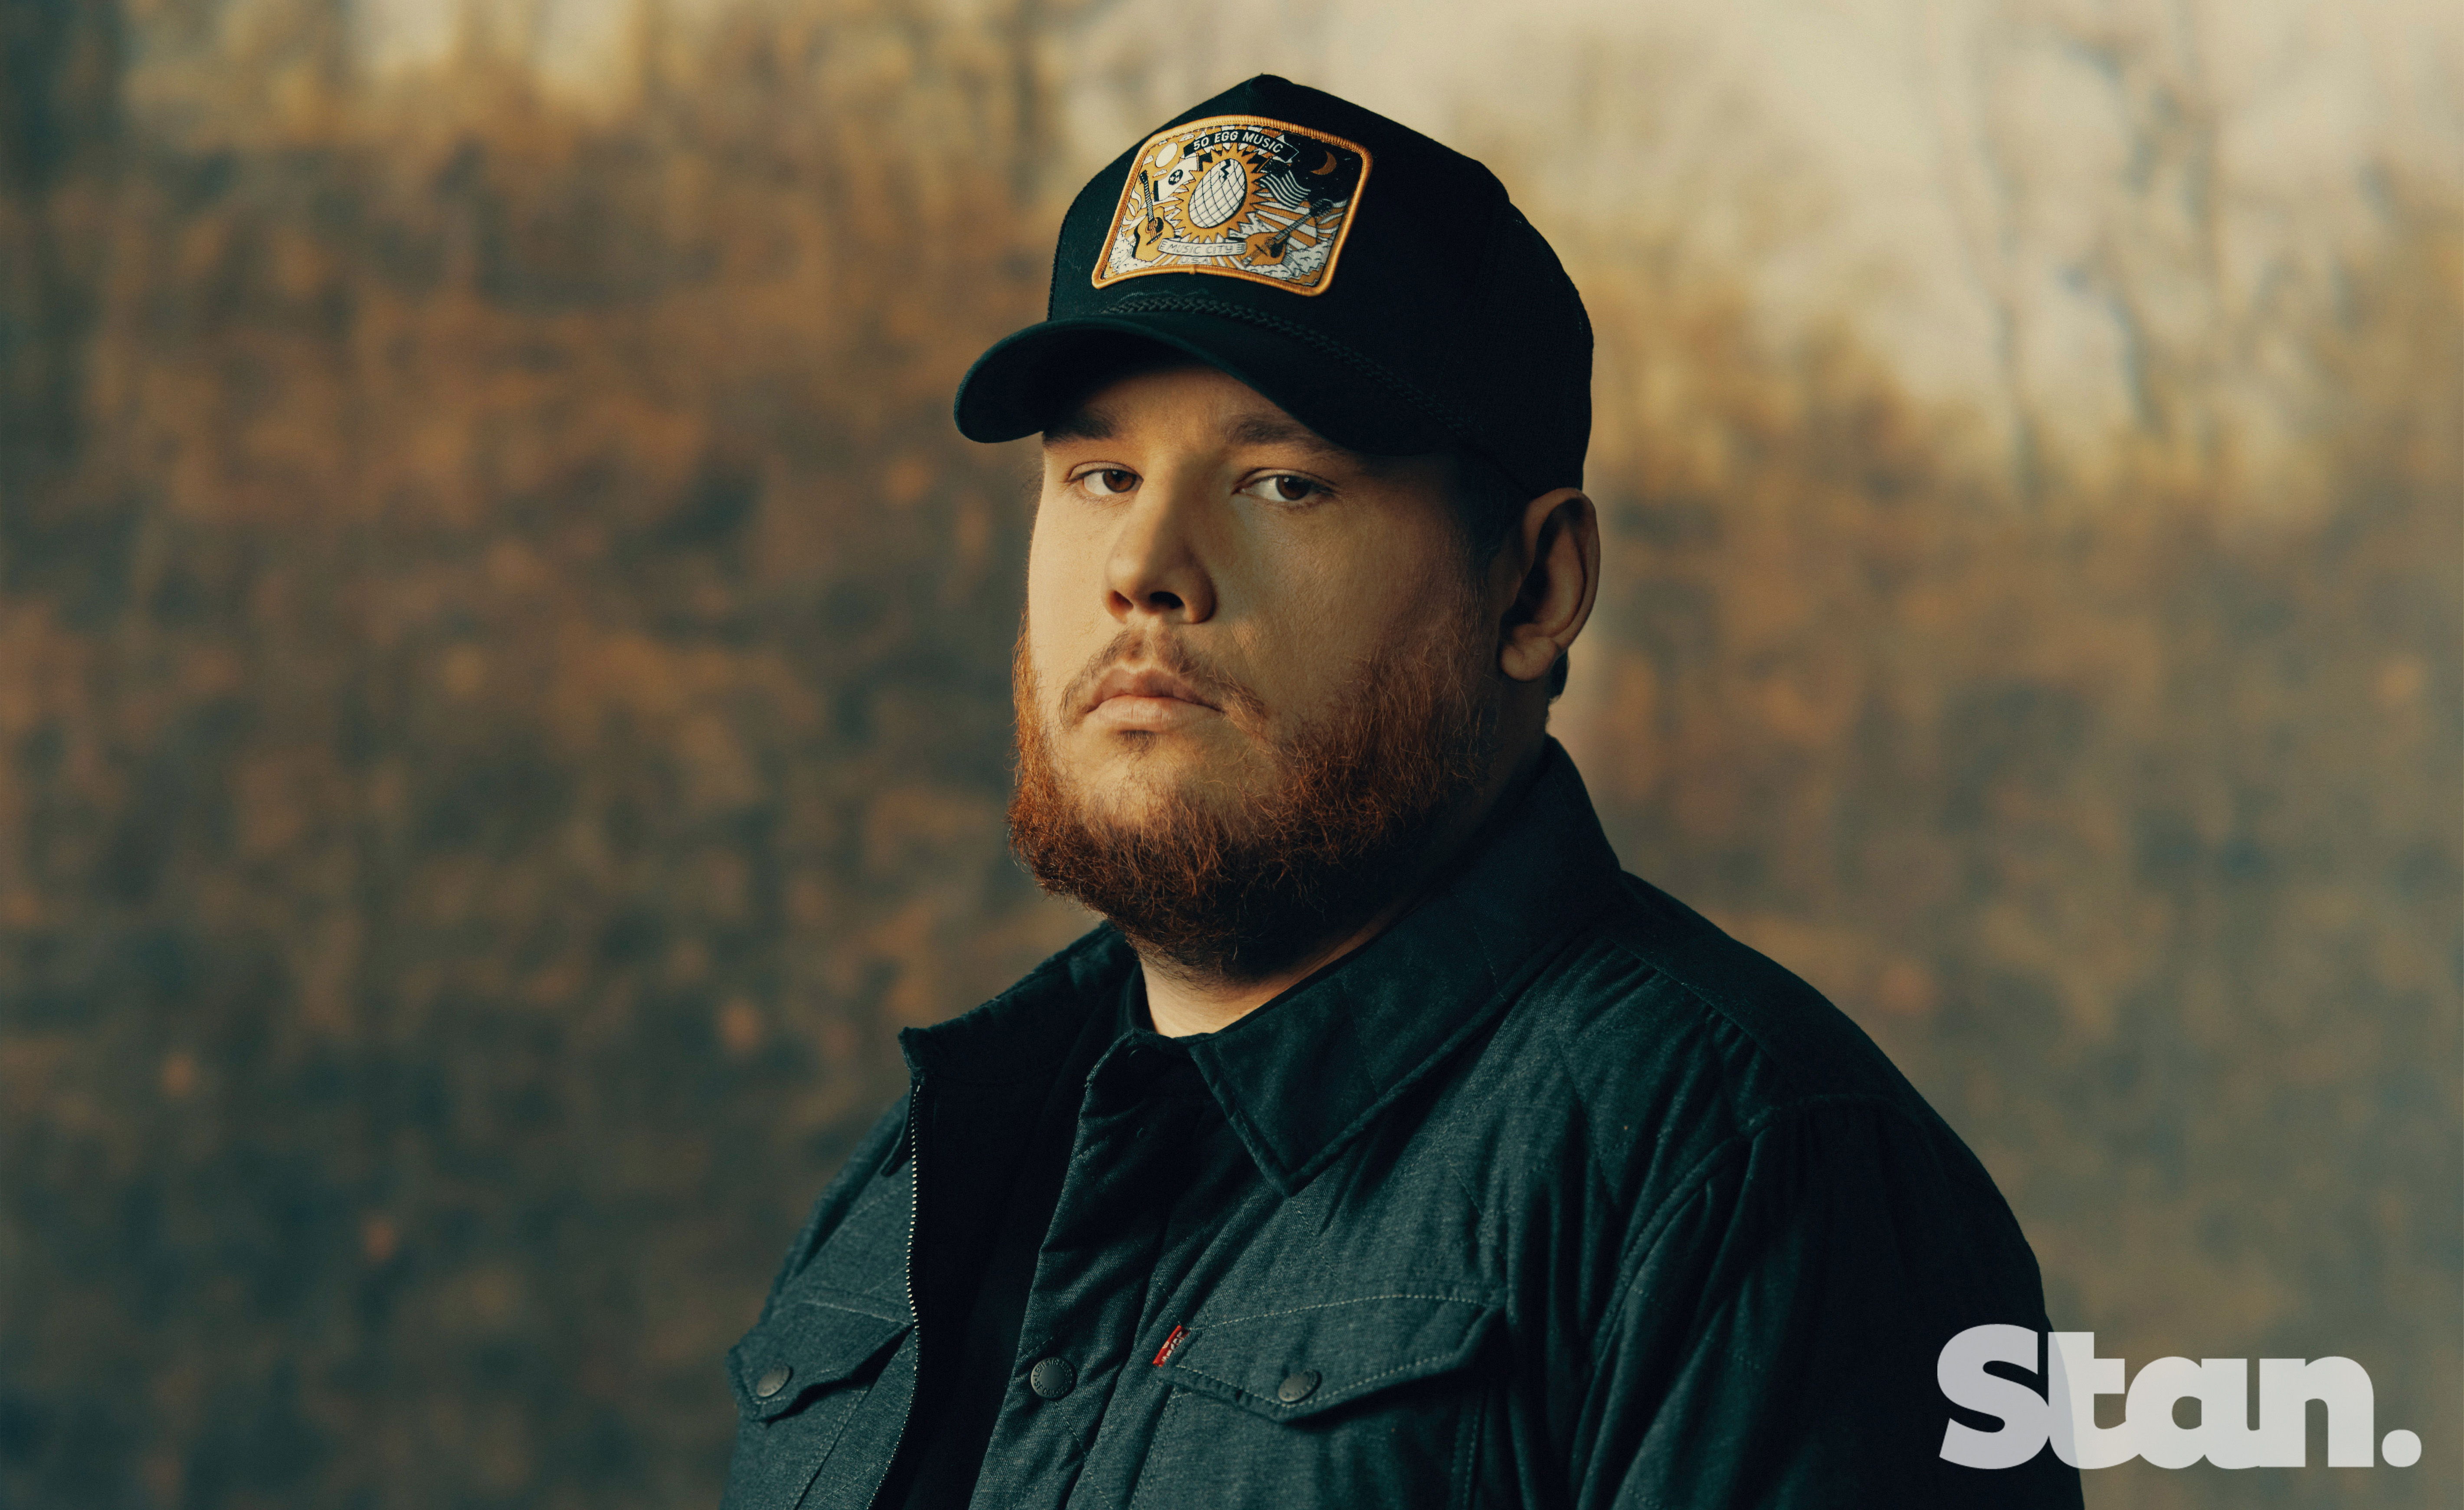 Luke Combs nominated for four awards including Entertainer of the Year